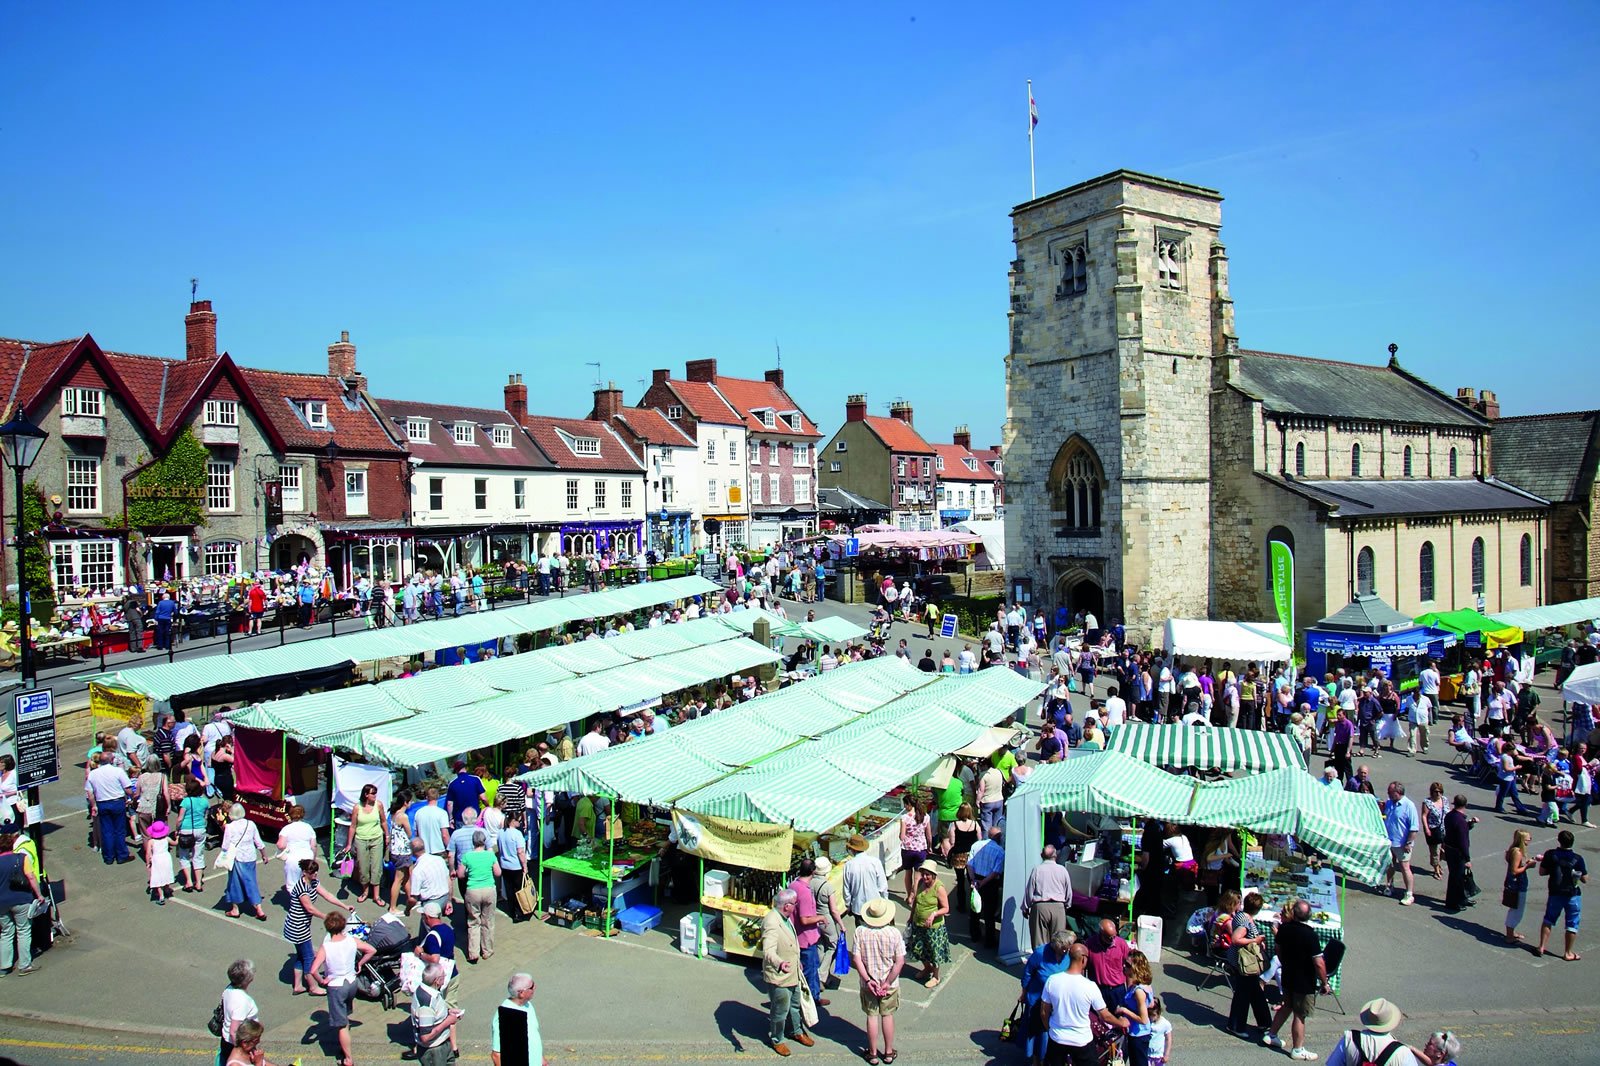 Image name malton market the 7 image from the post City Town and Farmers Markets in Yorkshire.com.